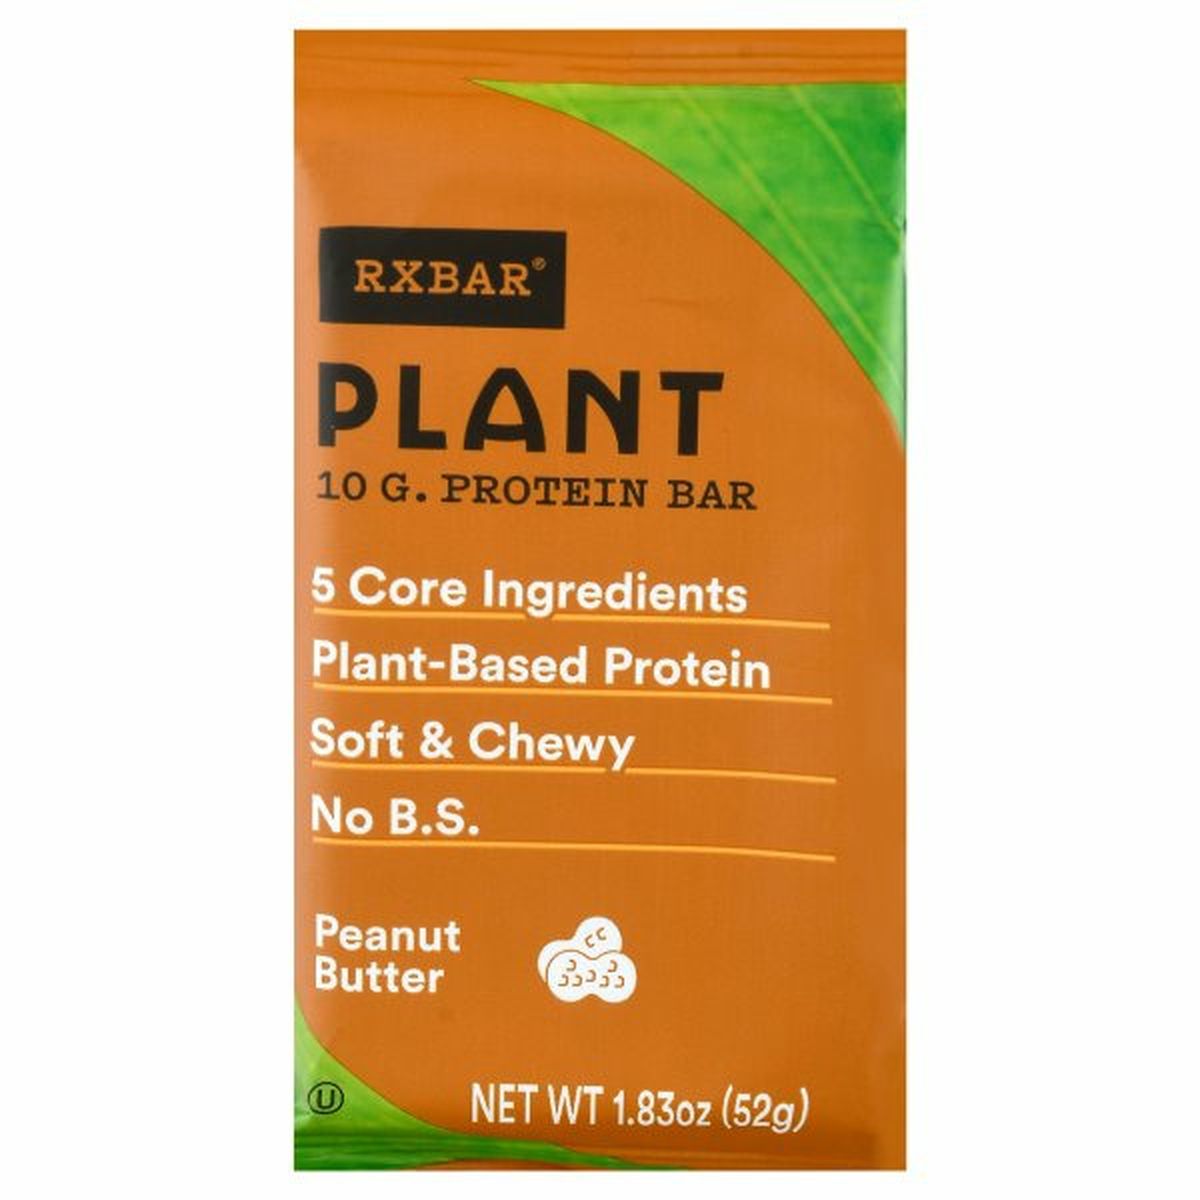 Calories in RXBAR Plant Protein Bar, Plant, Peanut Butter